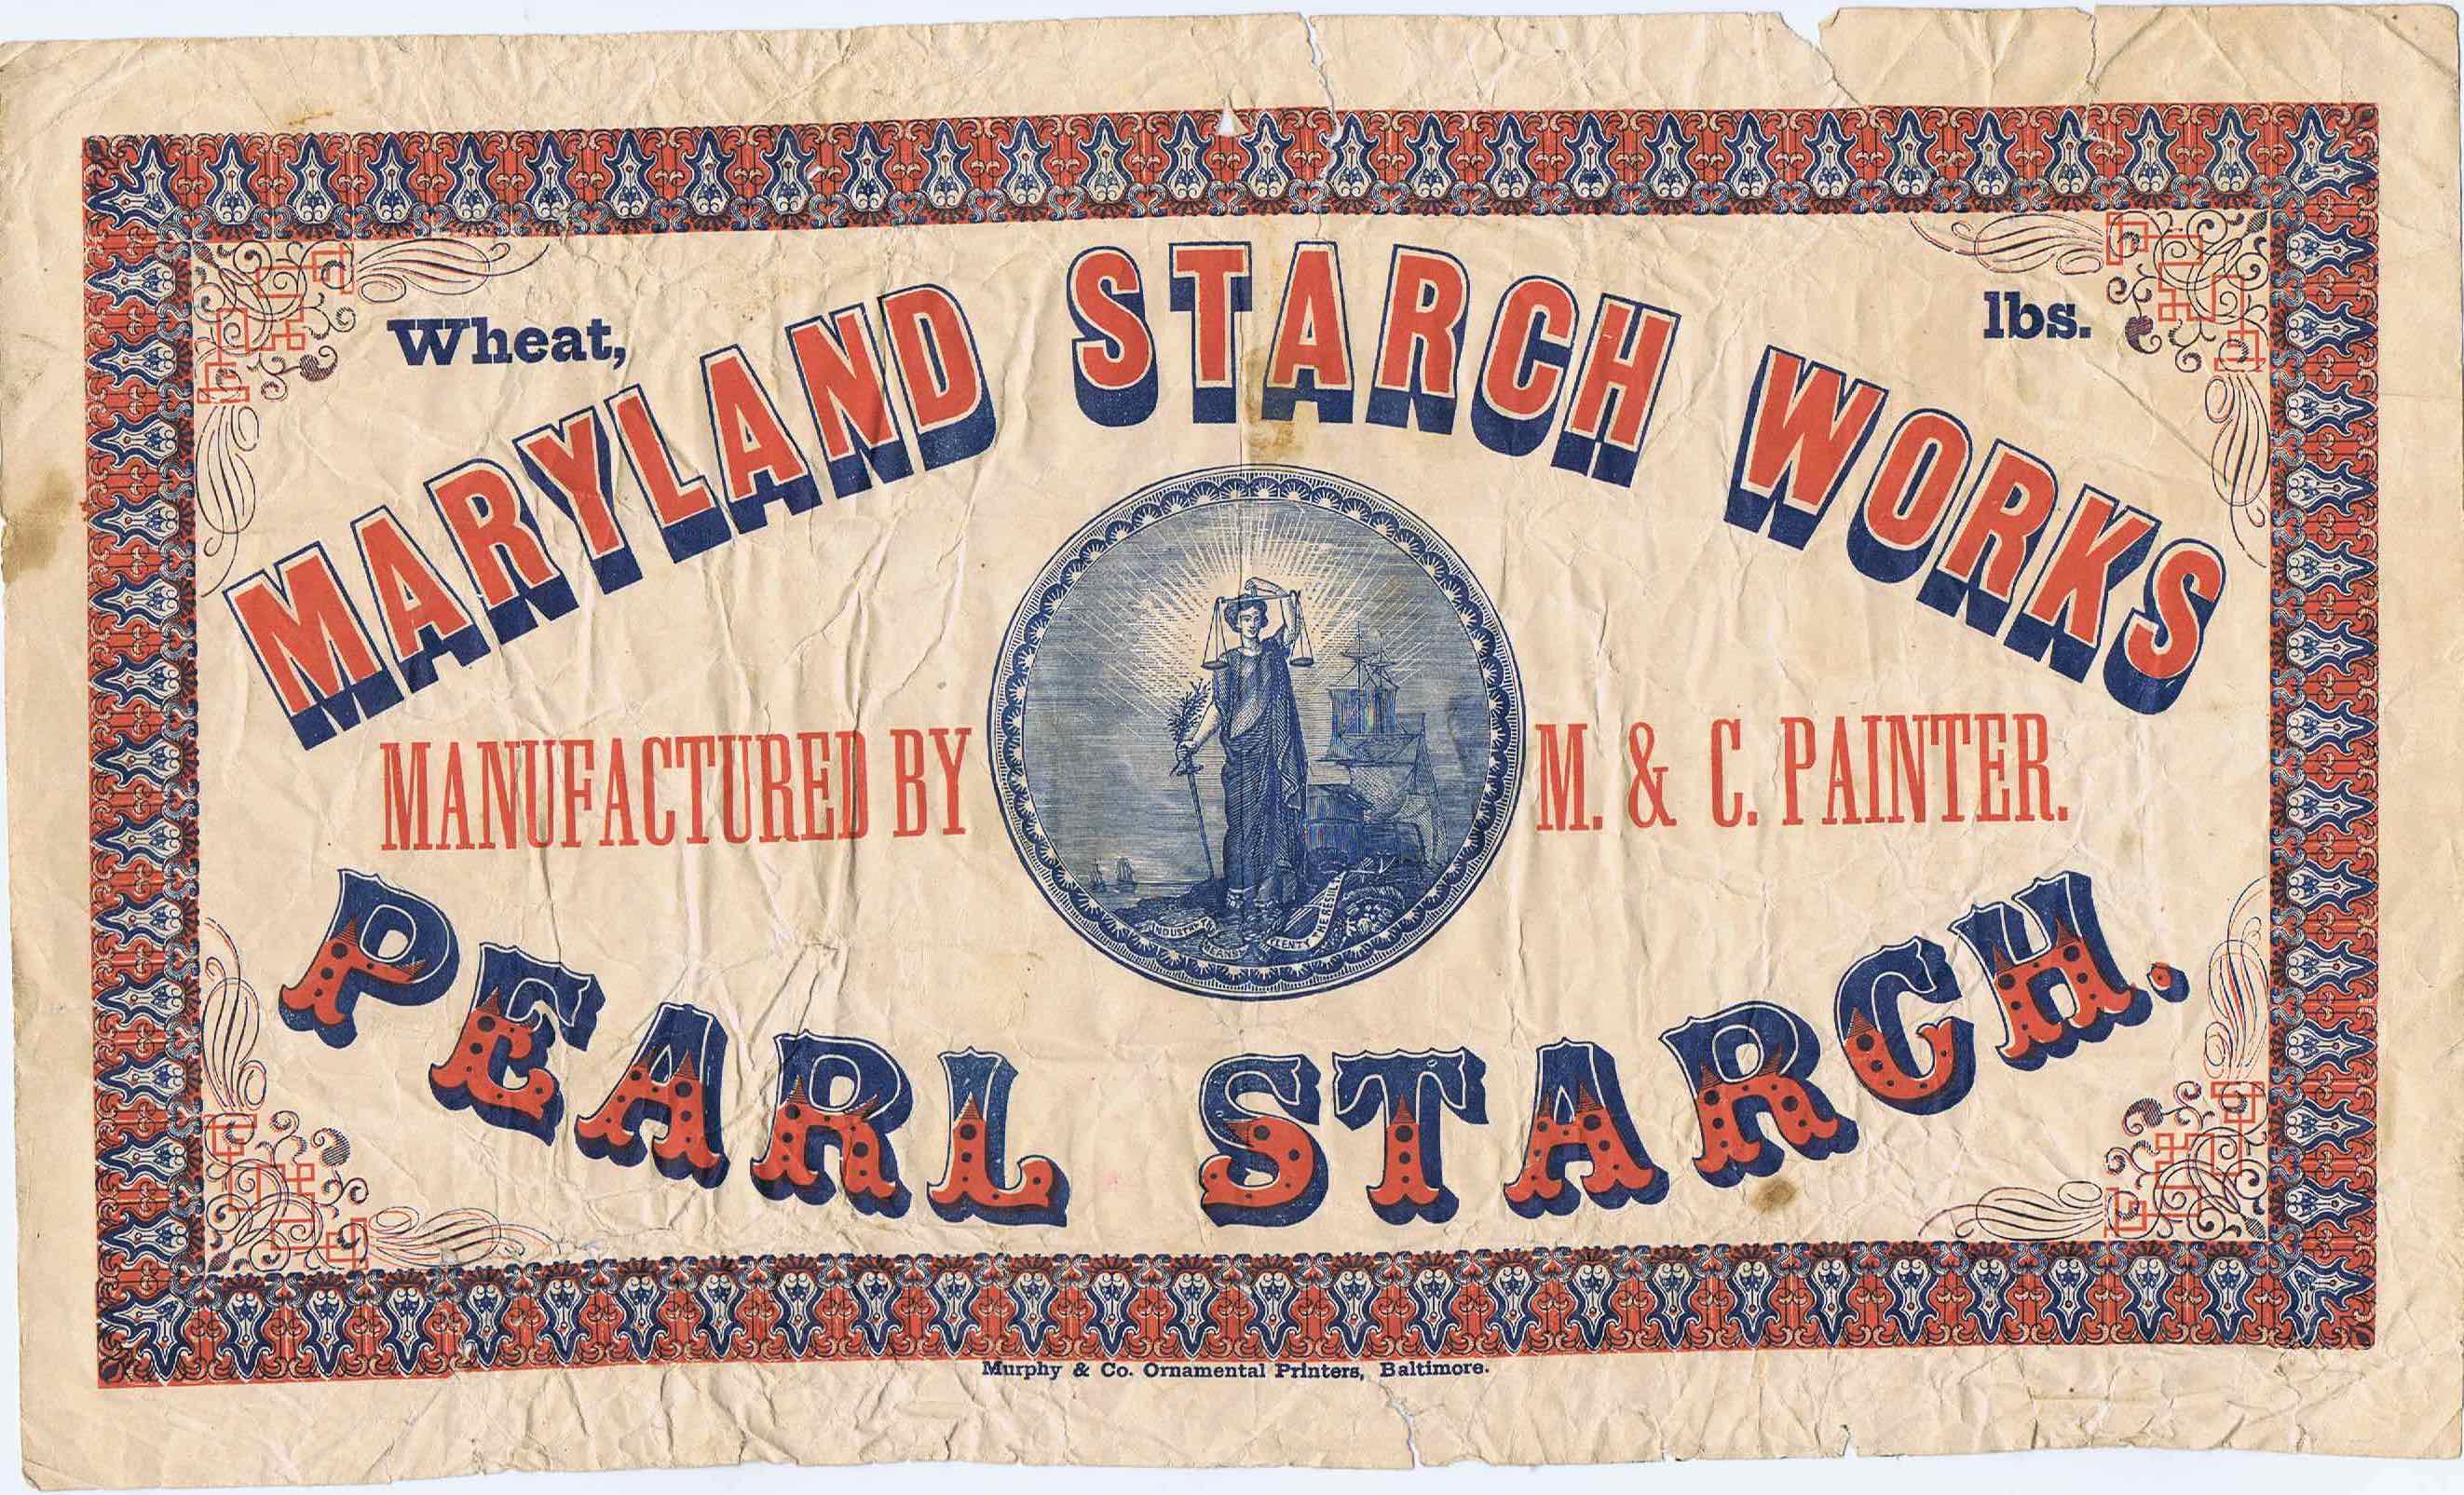 J243	MARYLAND STARCH WORKS - PEARL STARCH